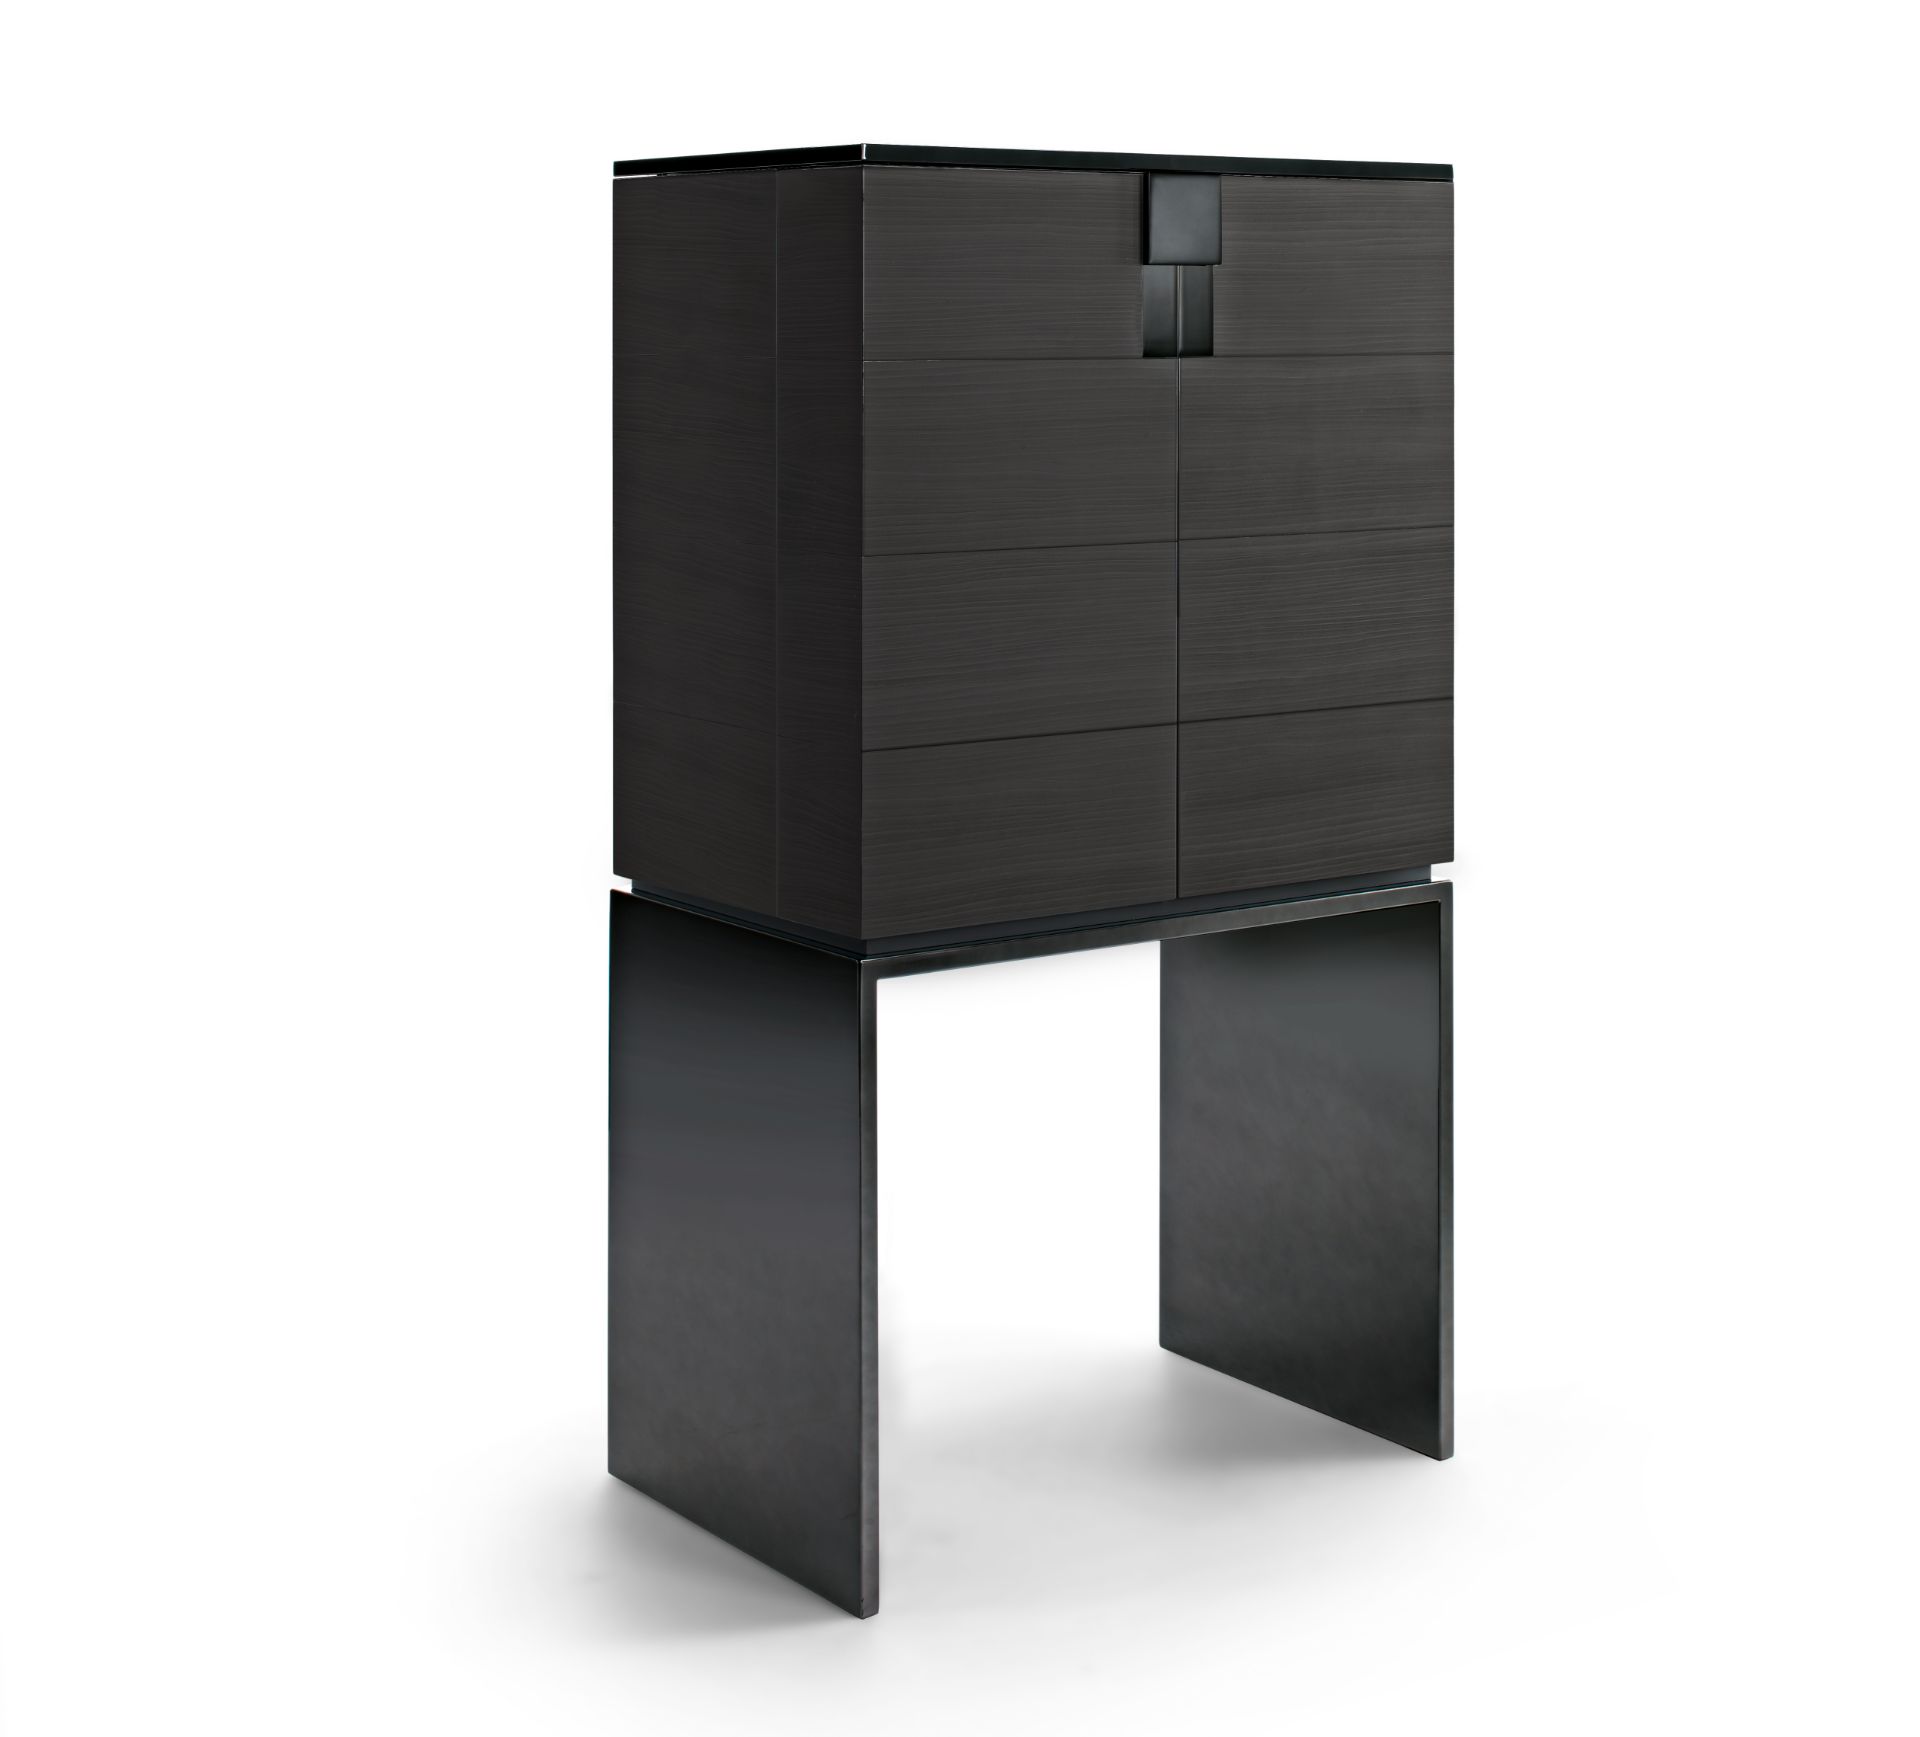 Black and More Bar Cabinet by Telemaco for Malerba Black chrome, combined with brushed matt finishes - Image 5 of 13